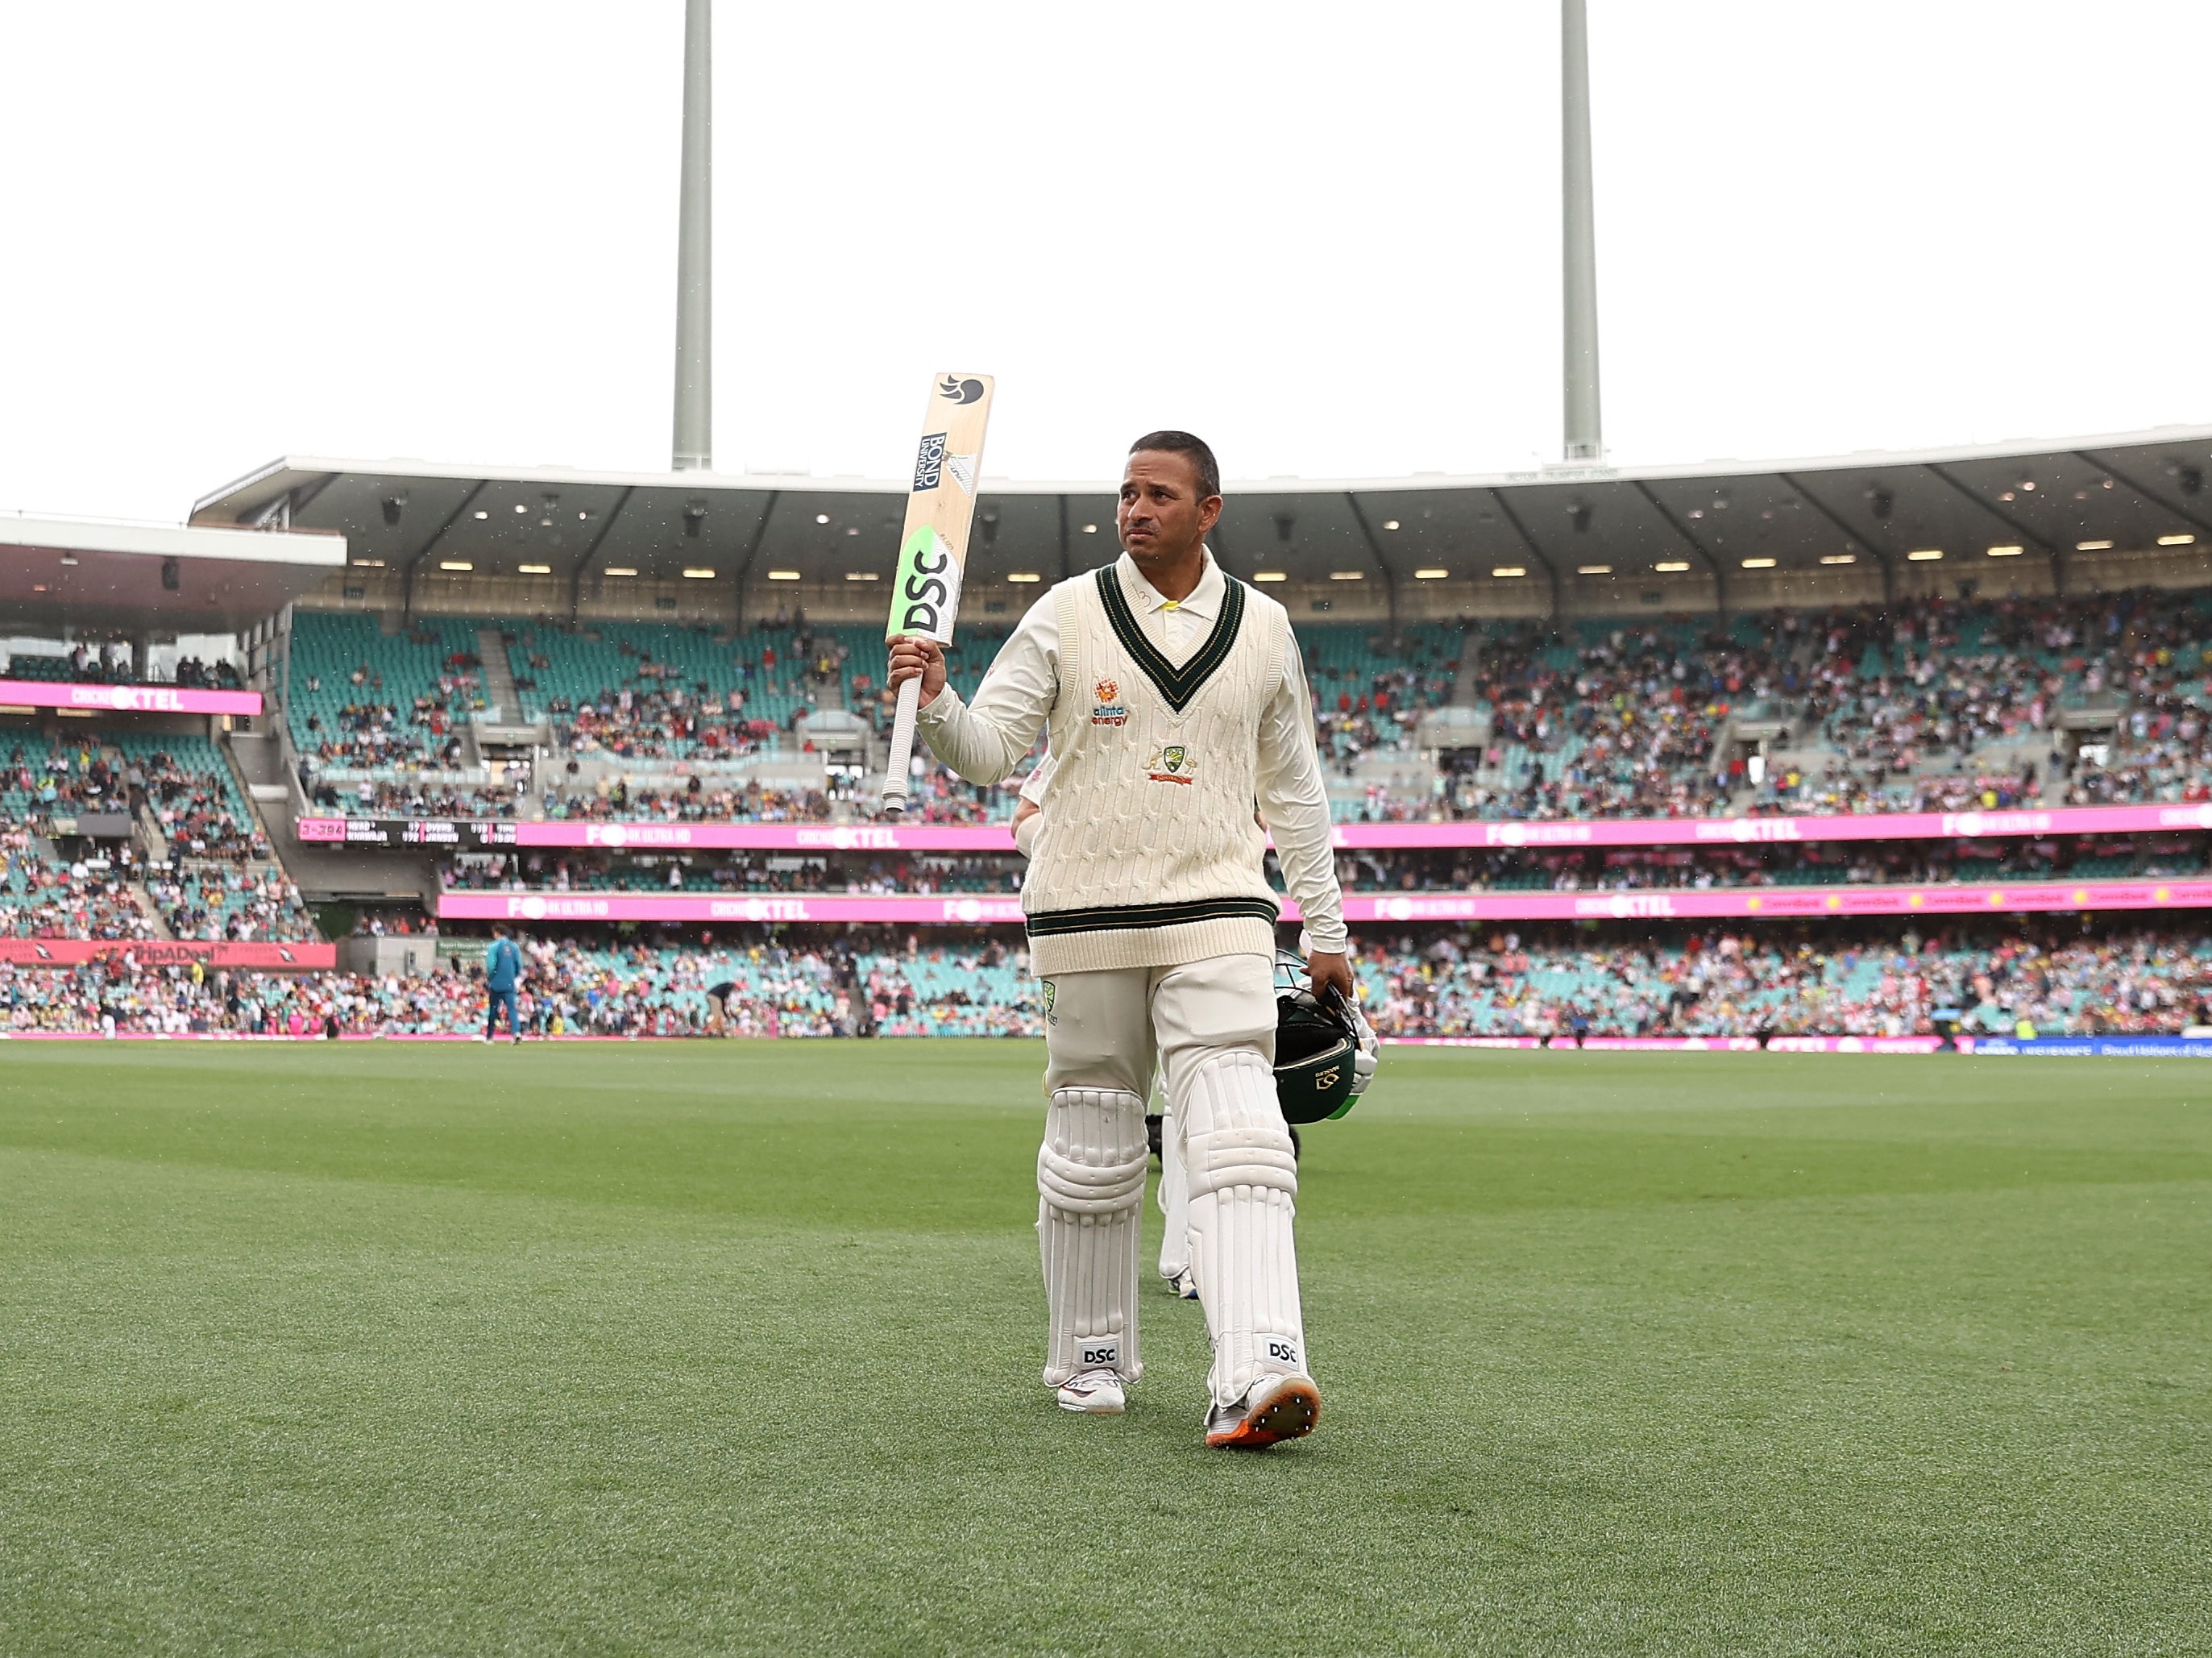 Opener Khawaja ended the day a career-high 195 not out